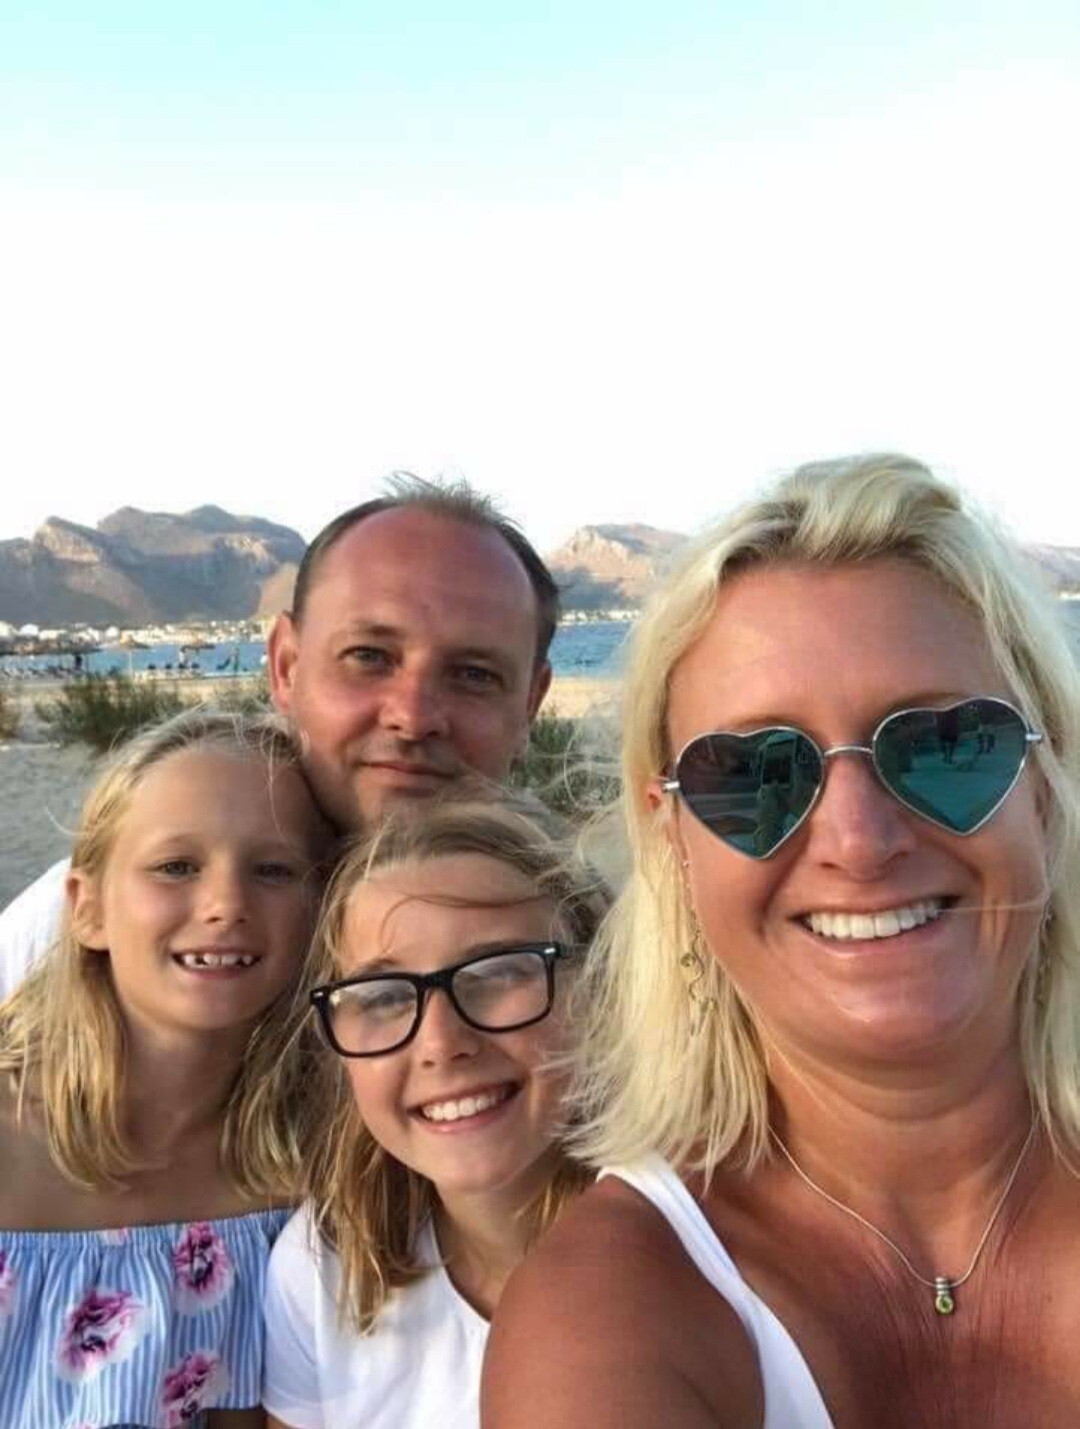 Amanda Schofield on a family holiday in Lanzarote in 2018. She was diagnosed with brain cancer in 2020.